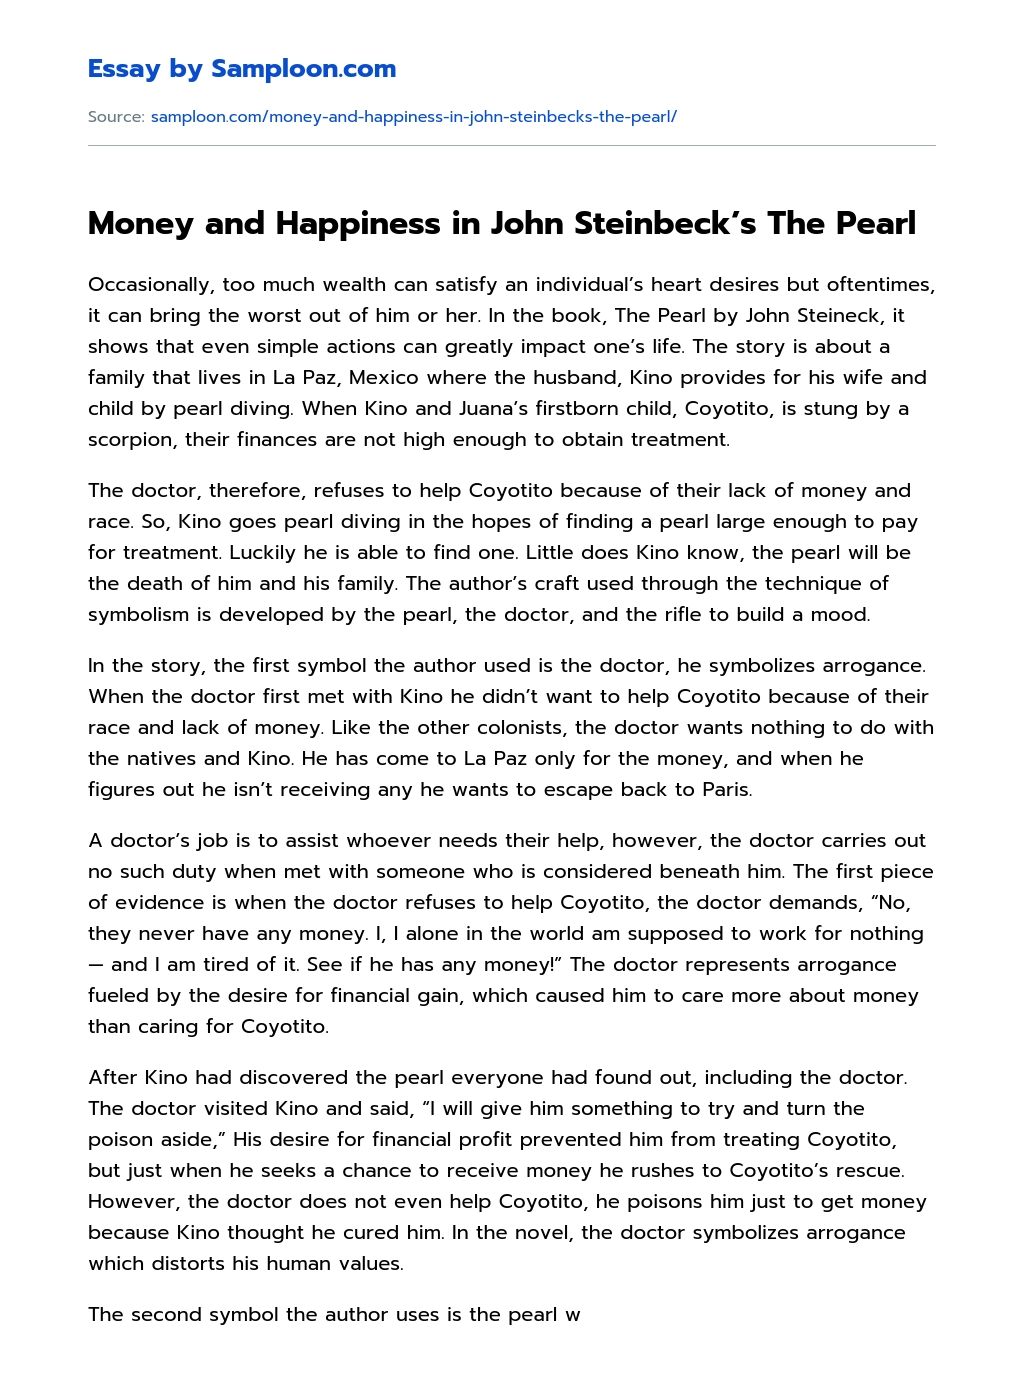 Money and Happiness in John Steinbeck’s The Pearl Summary essay